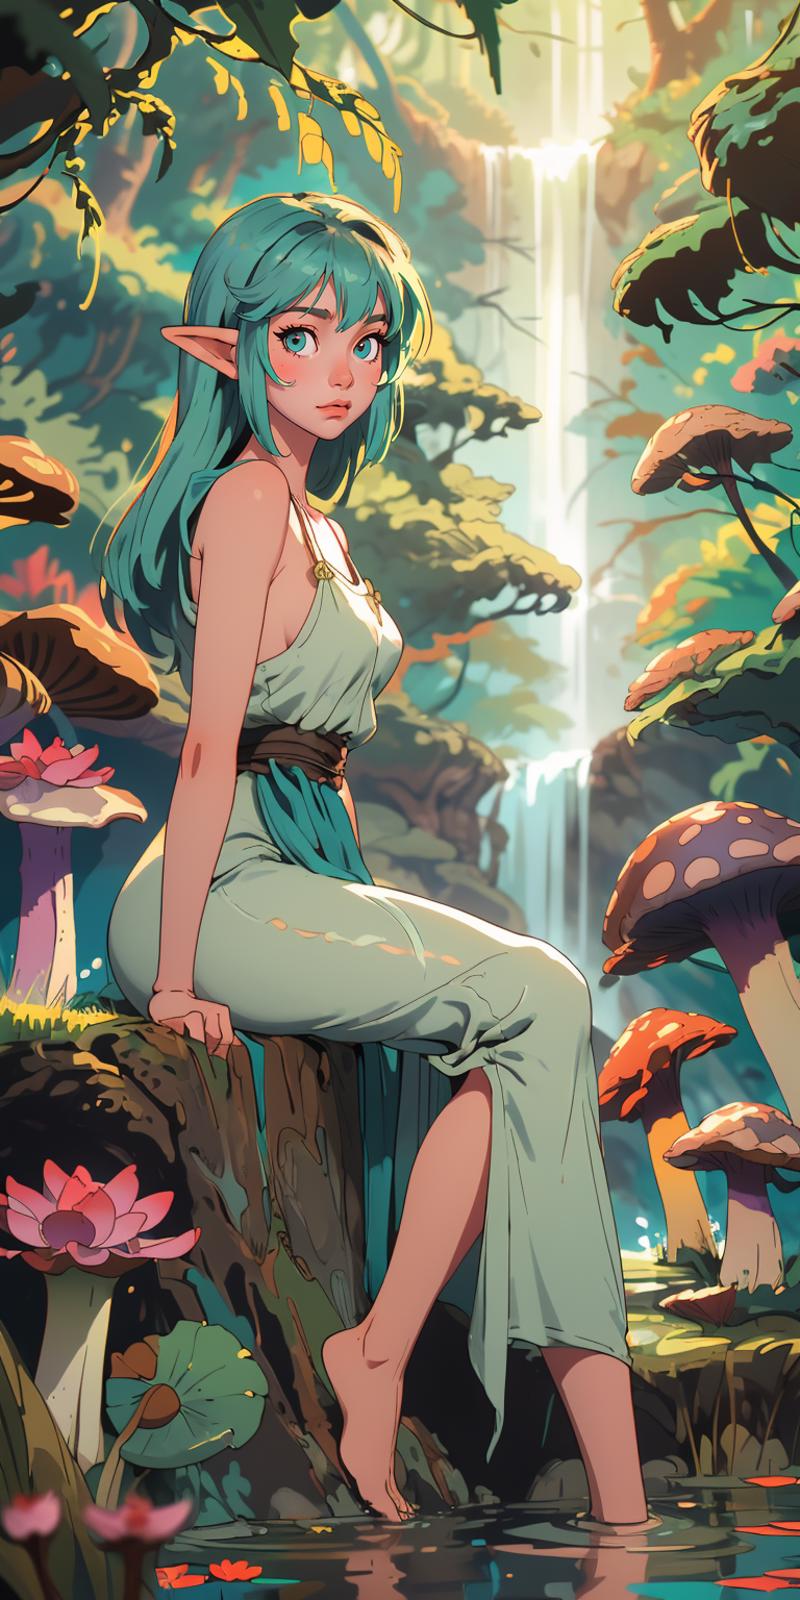 A beautiful blue-haired woman sitting on a mushroom in a forest.